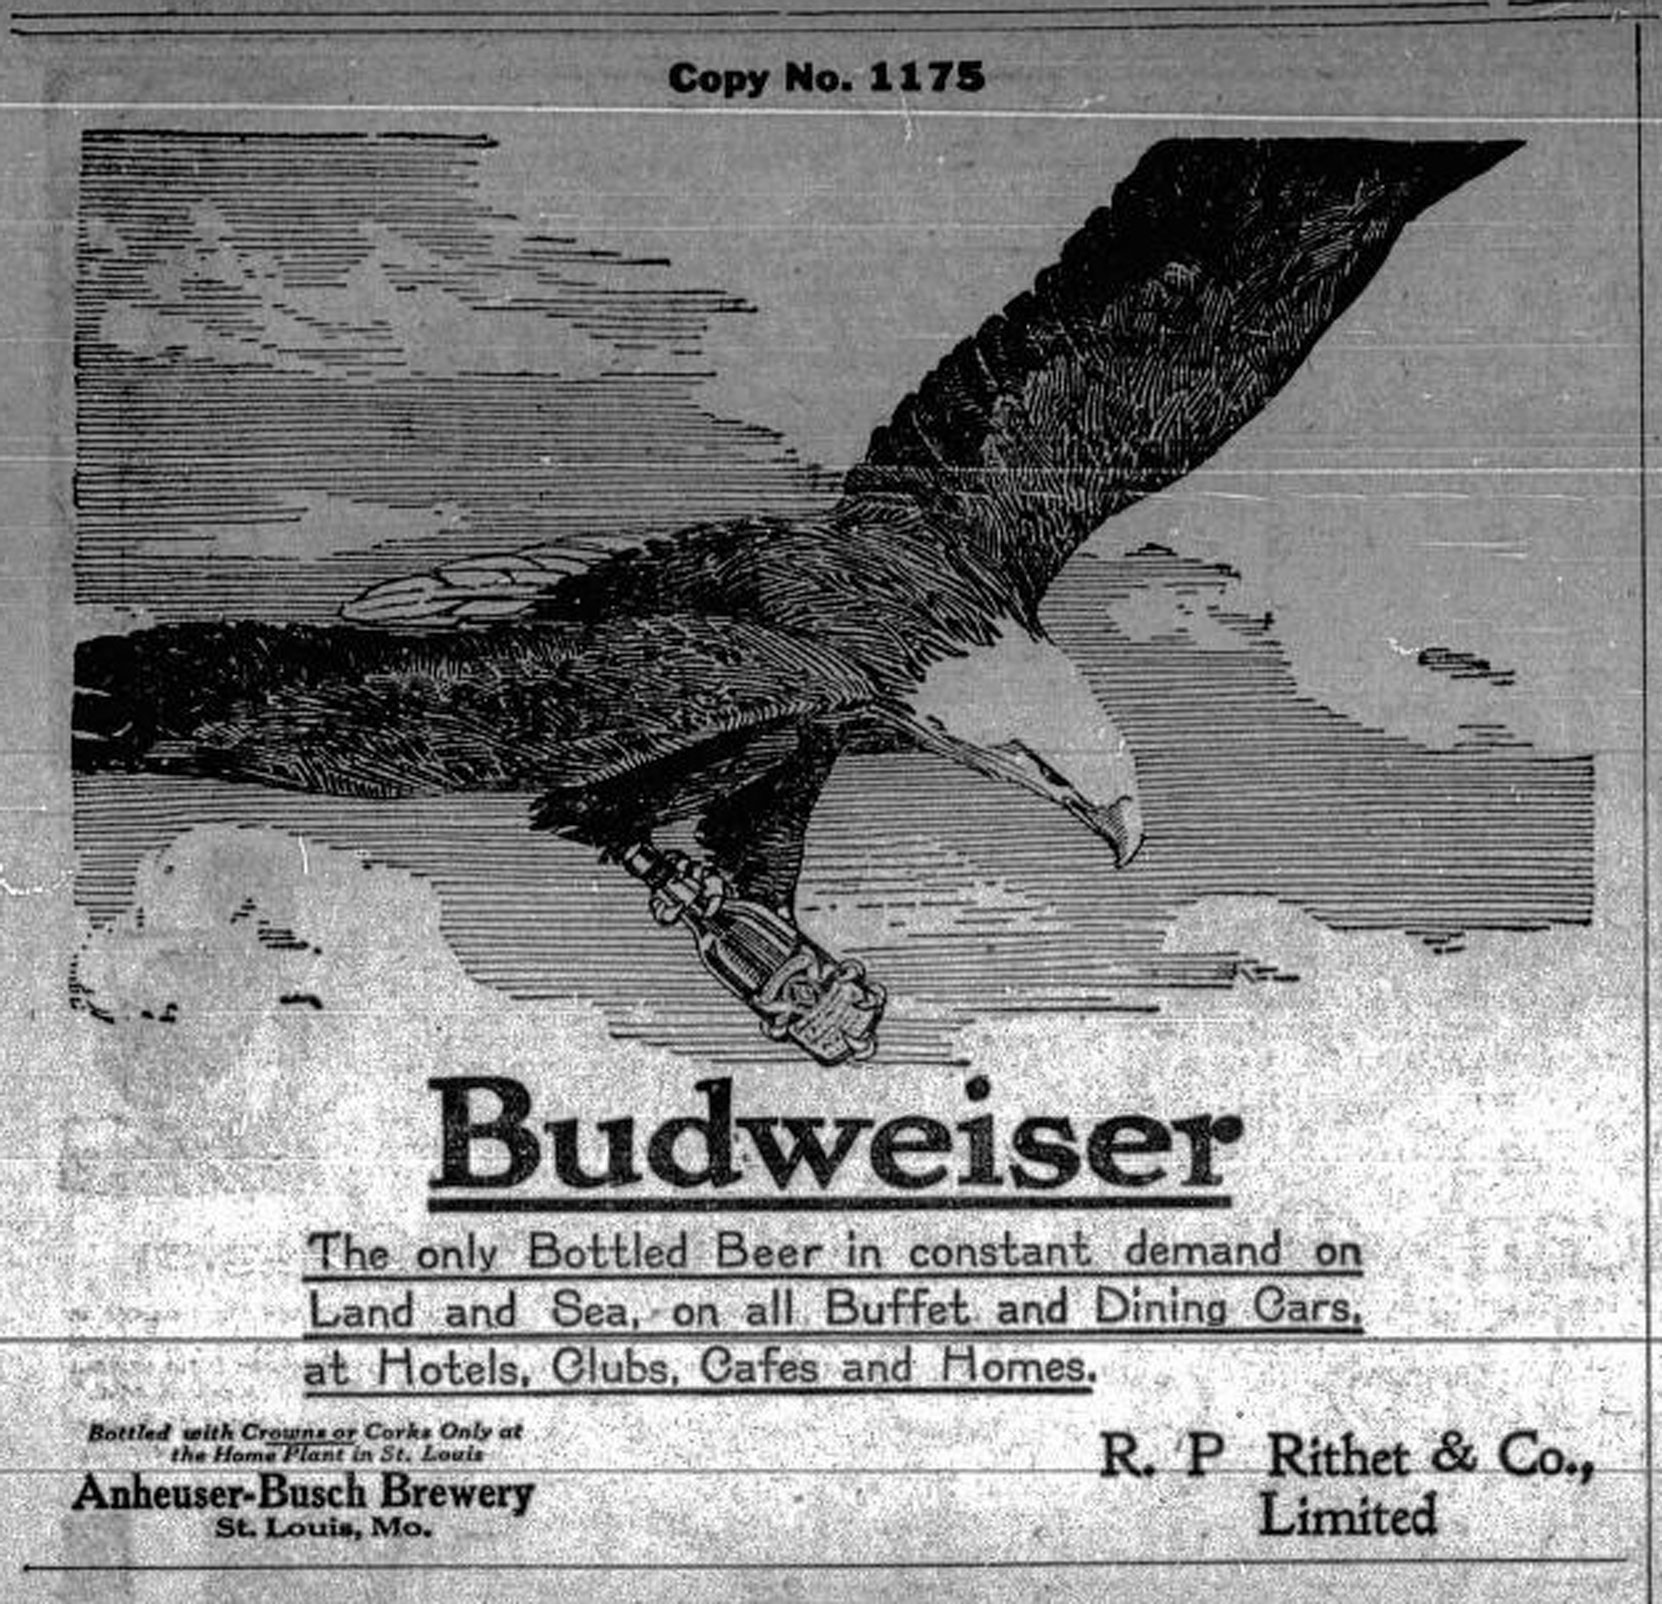 1913 advertisement Budweiser beer, distributed in Victoria by R.P. Rithet & Co., Wharf Street (Victoria Online Sightseeing Tours collection)